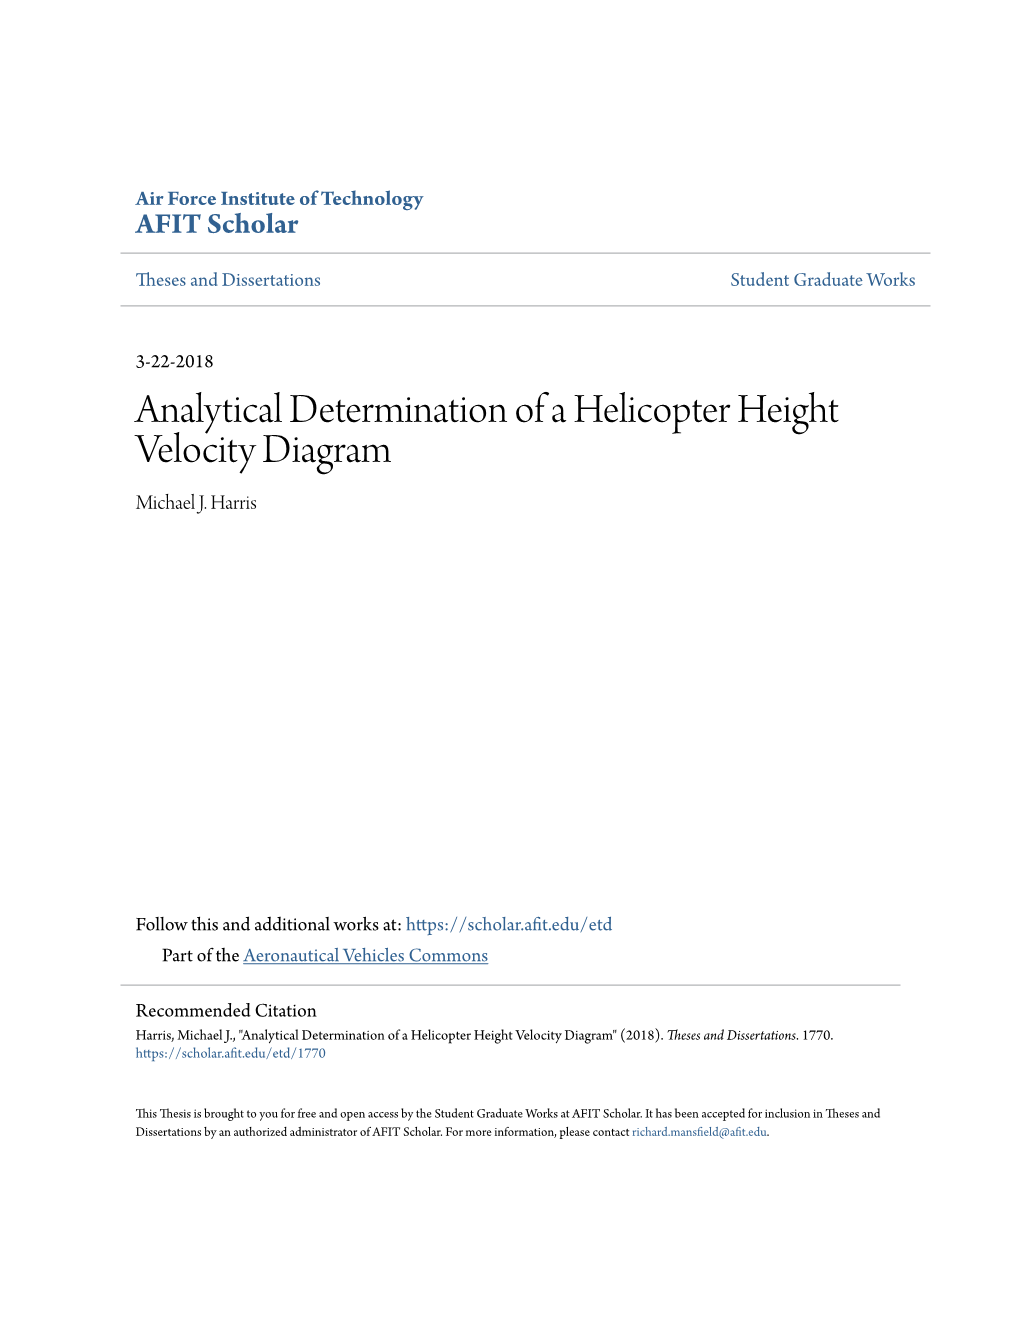 Analytical Determination of a Helicopter Height Velocity Diagram Michael J